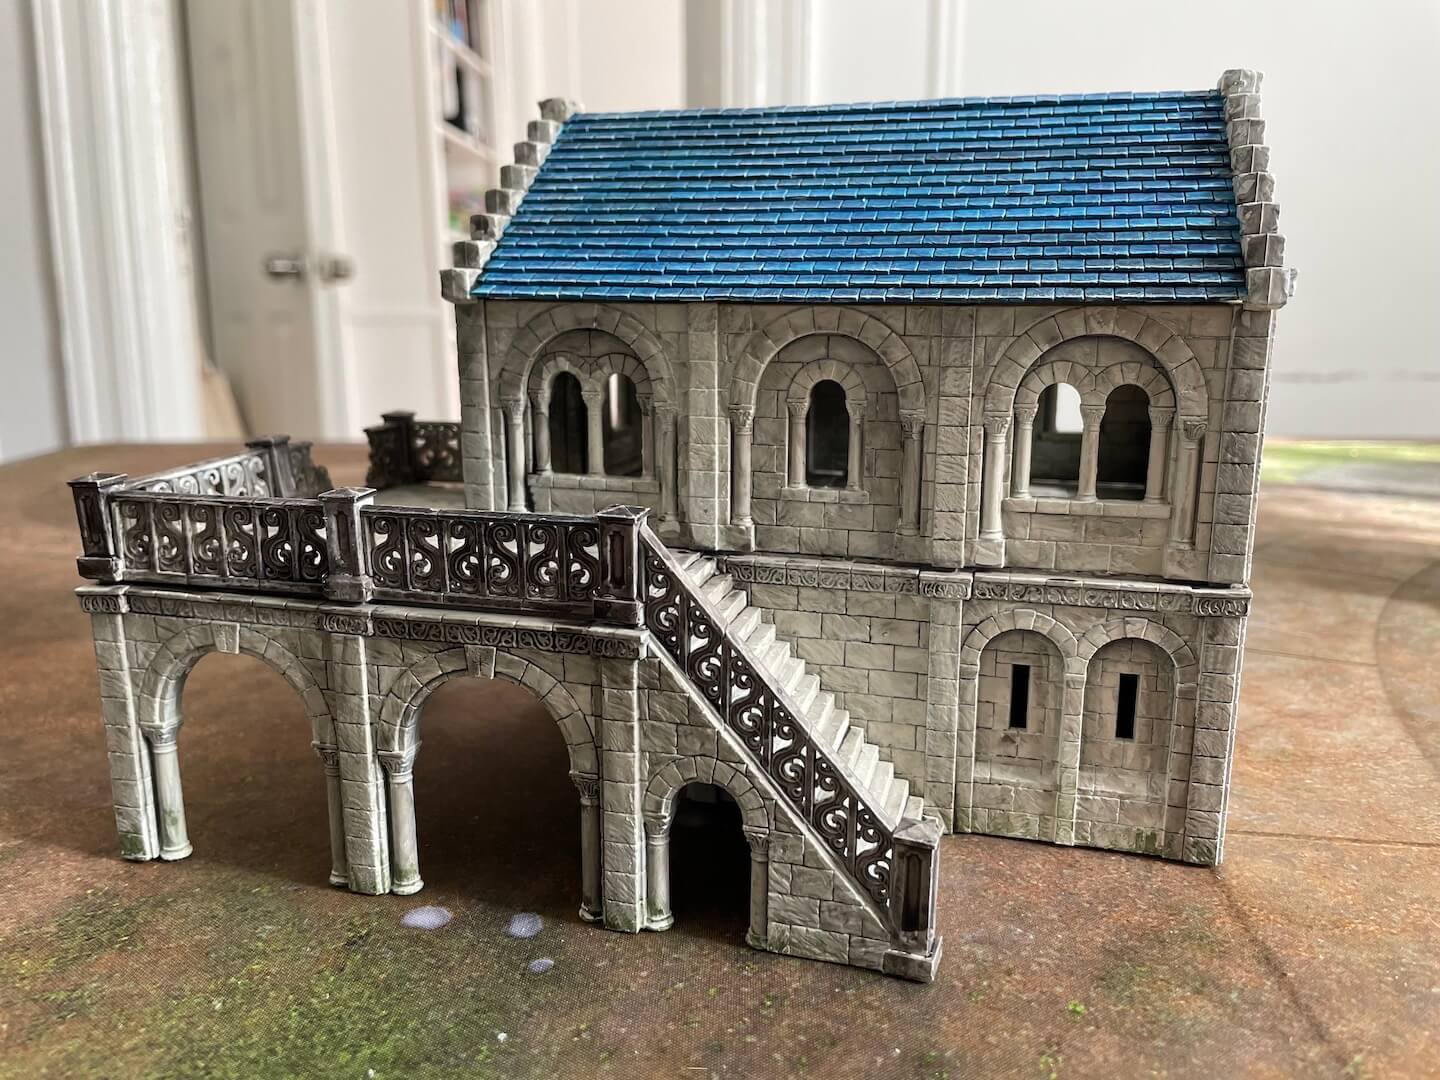 An image of the Gondor Mansion terrain from Games Workshop LOTR, painted